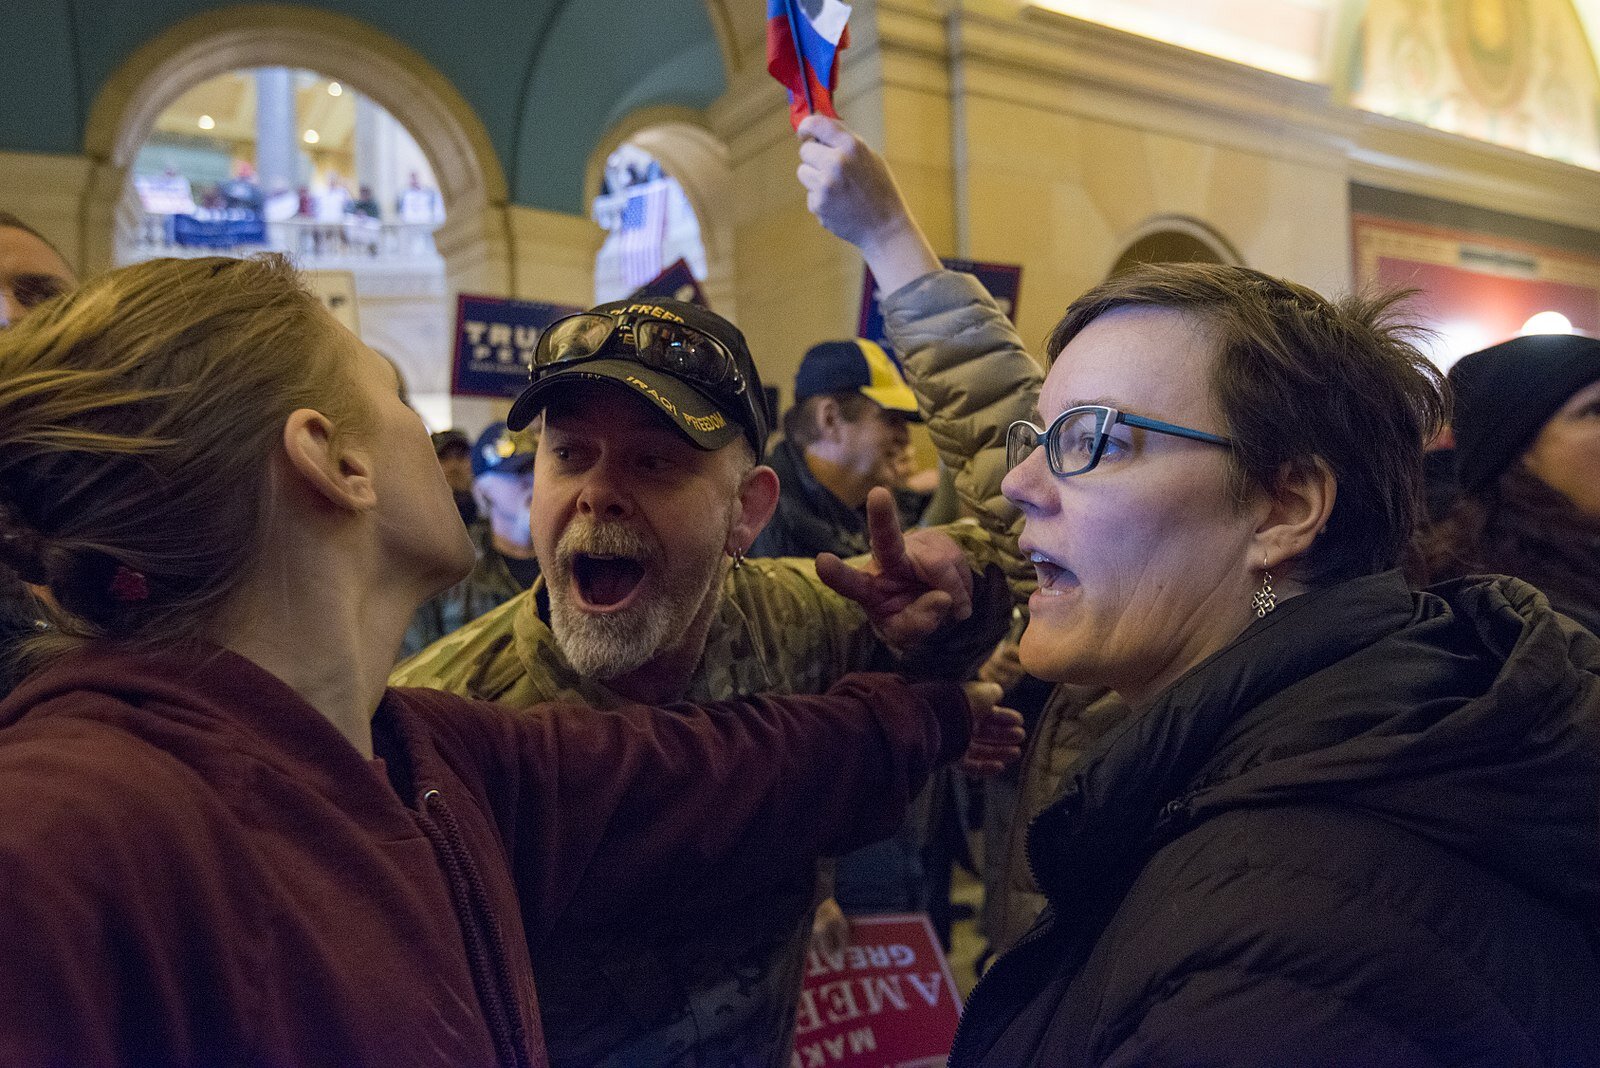 A clash between Trump supporters and an anti-Trump counter-protestor during the "March 4 Trump" rally at the Minnesota capitol on March 4th, 2017. About 700 people were there to show support for Republican President Donald Trump. (Photo by Fibonacci…